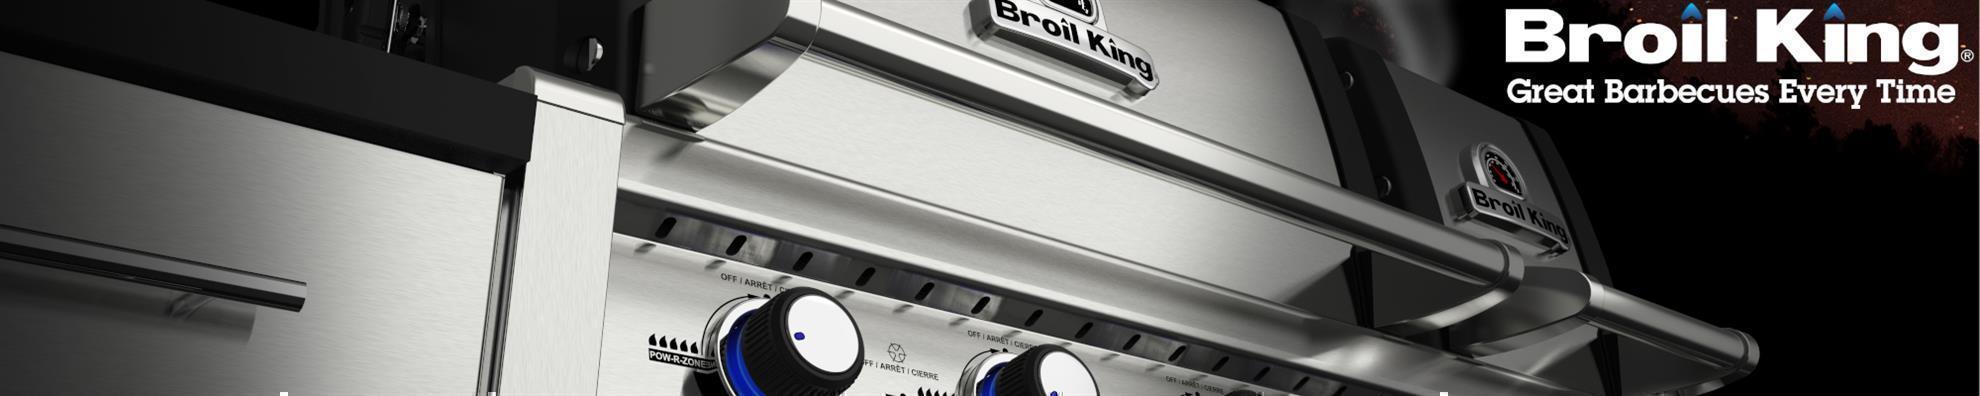 Broil King - SILIKONPINSEL IMPERIAL